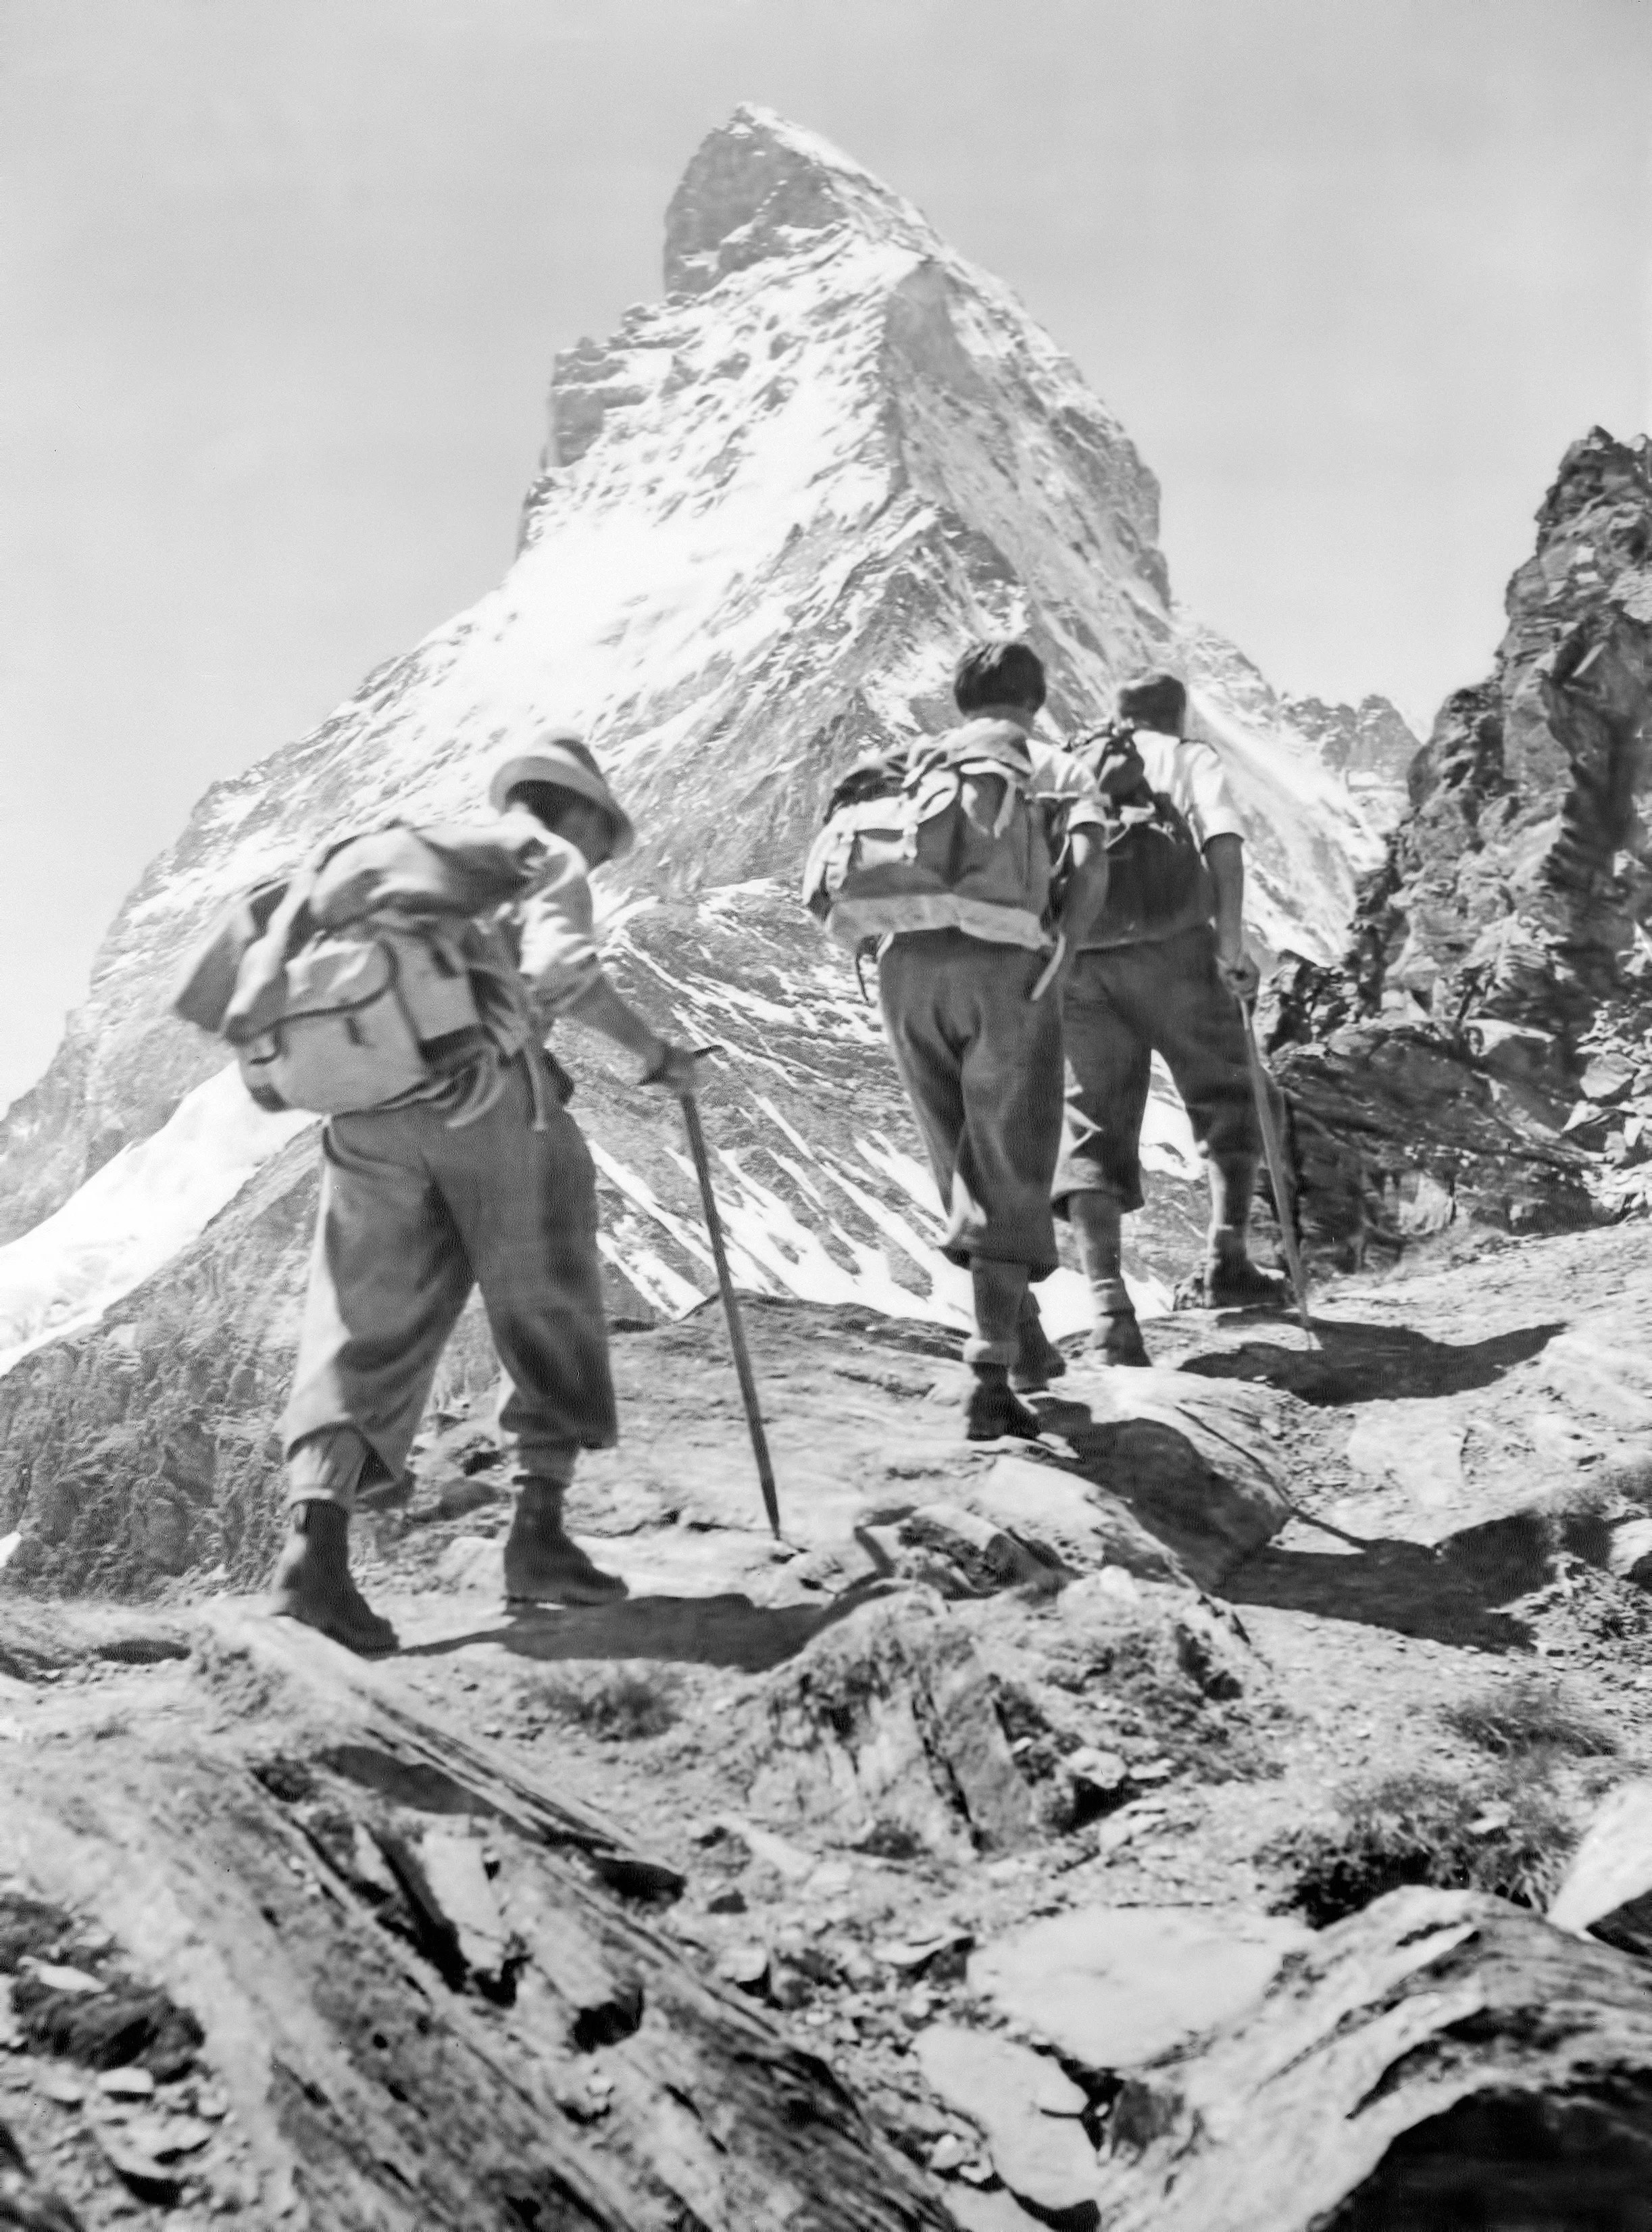 Three men hike up a rocky terrain with snow covered mountains in the background.